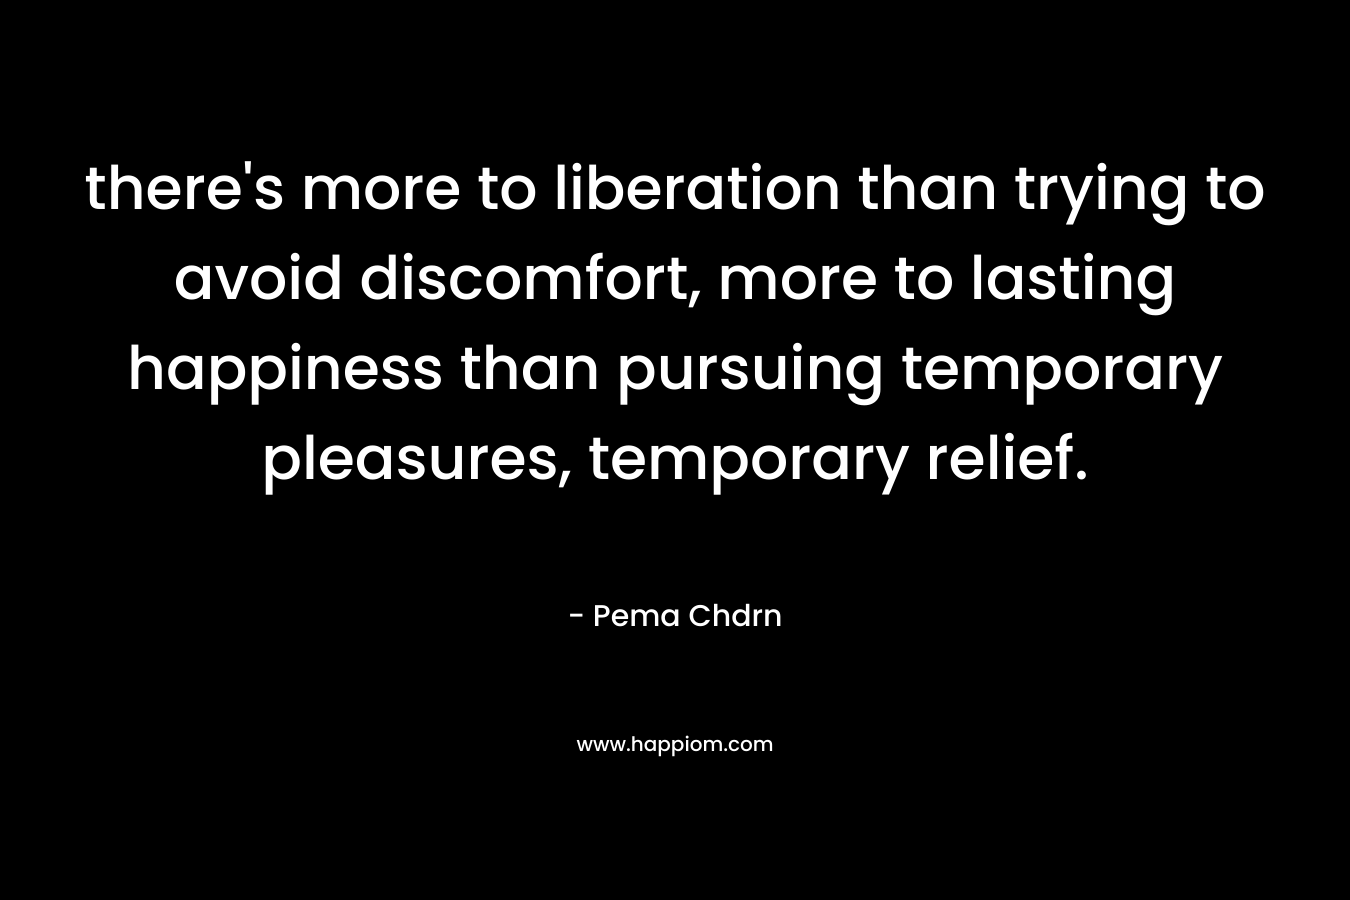 there's more to liberation than trying to avoid discomfort, more to lasting happiness than pursuing temporary pleasures, temporary relief.